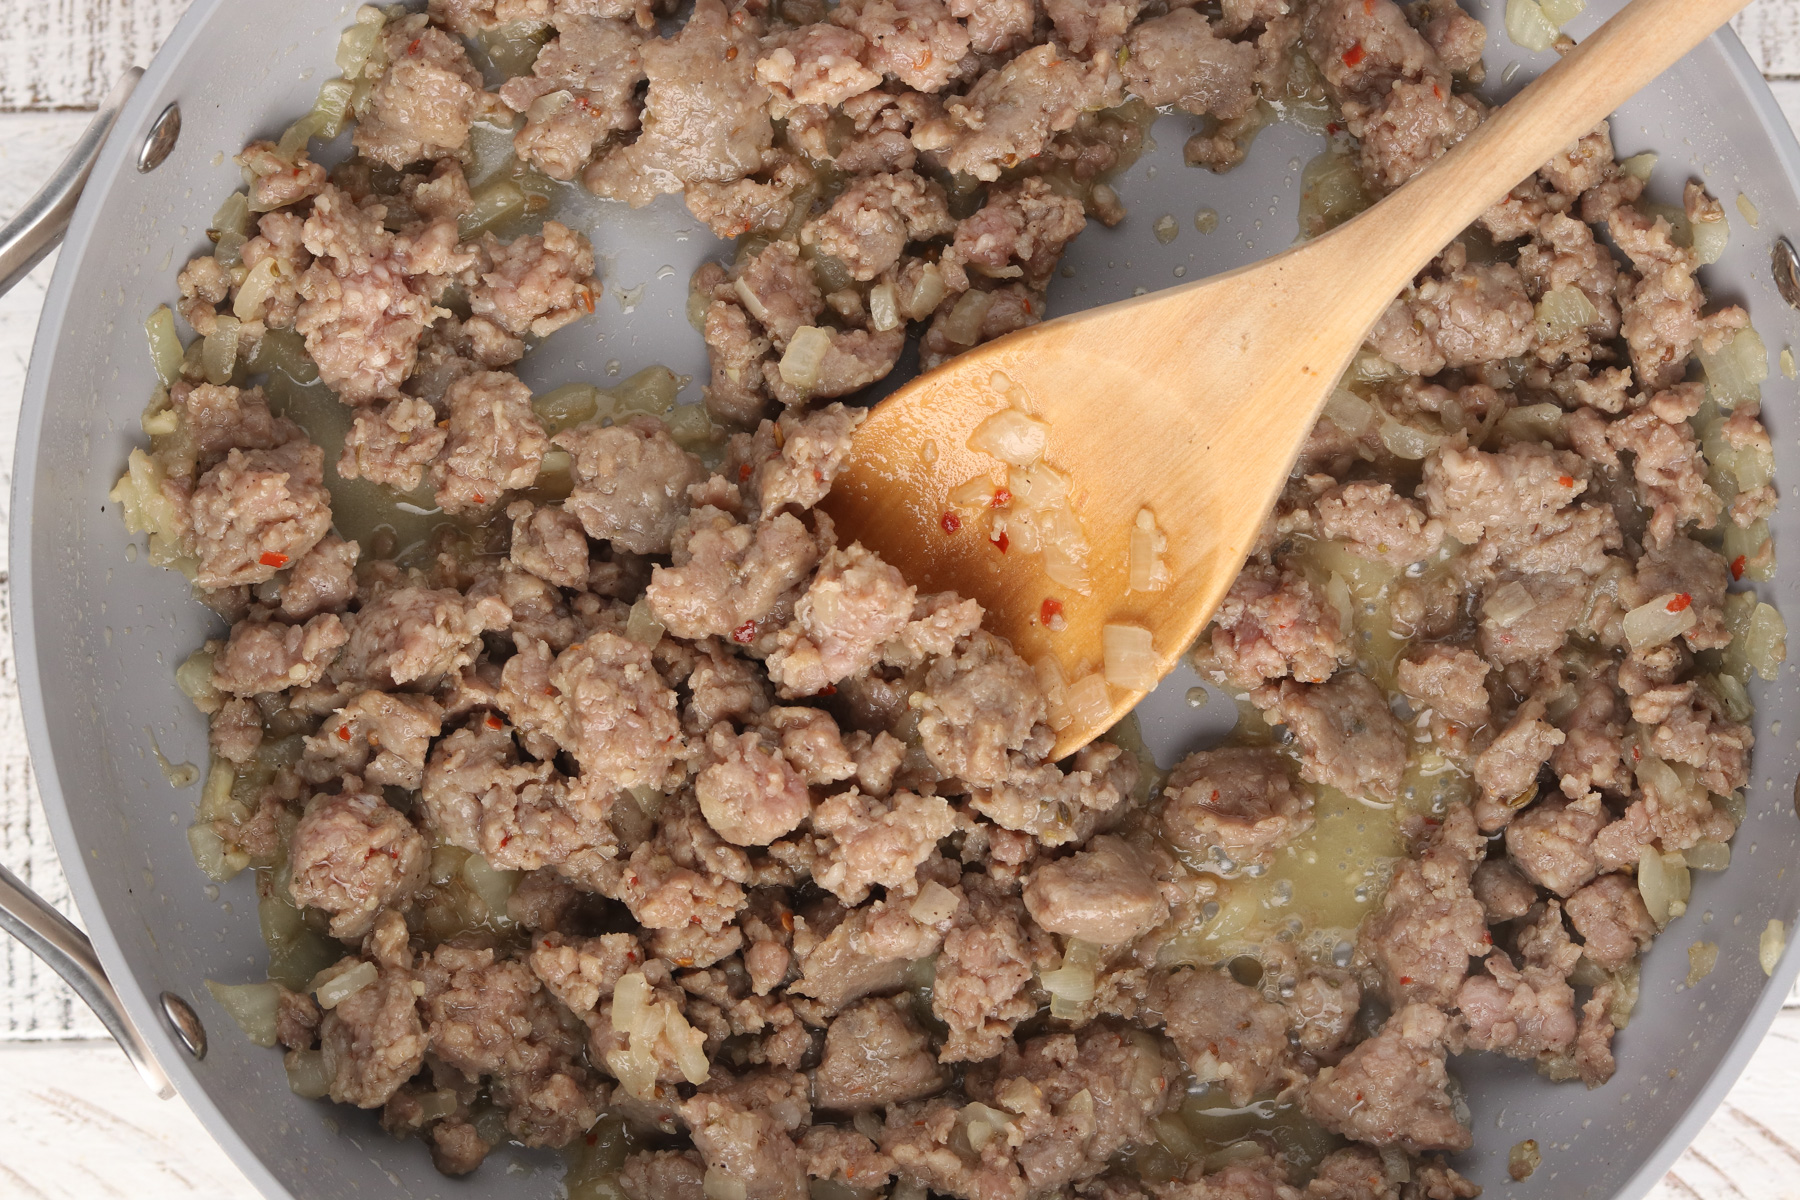 Step 2 - Meaty Marinara: Add ground sausage, salt and pepper to the pan.